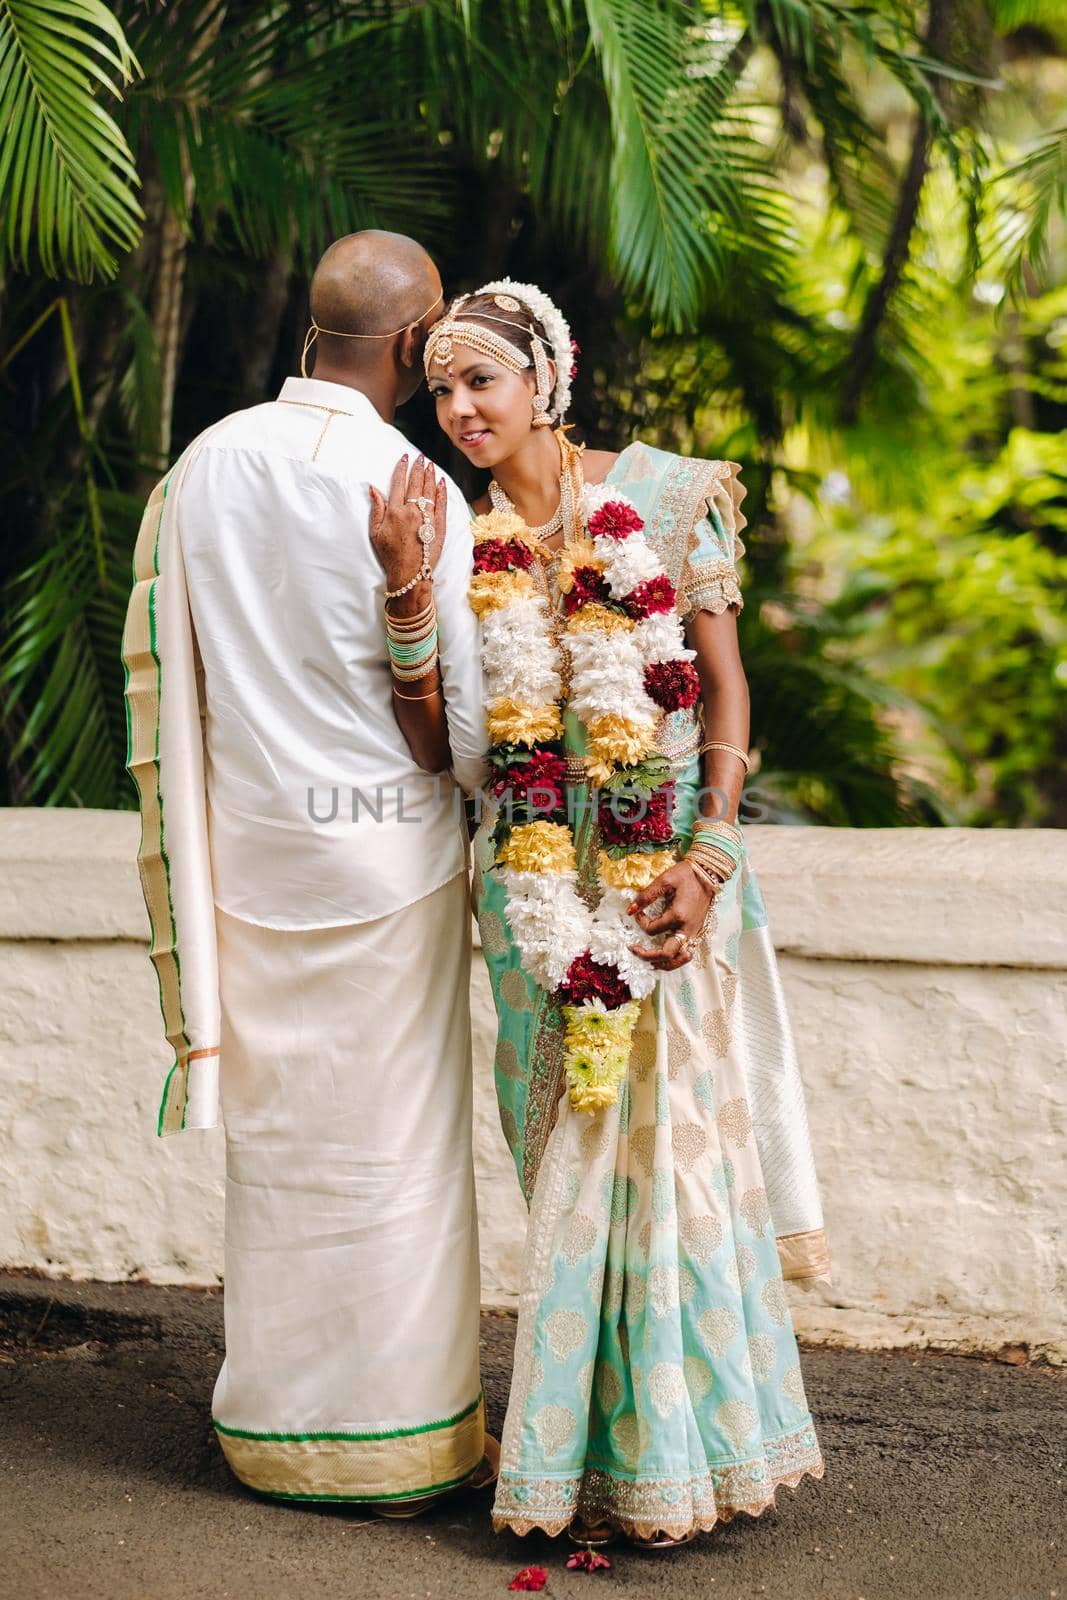 December 8, 2019.Mauritius.The bride and groom in national Mauritian outfits at the Botanical Garden on the island of Mauritius by Lobachad